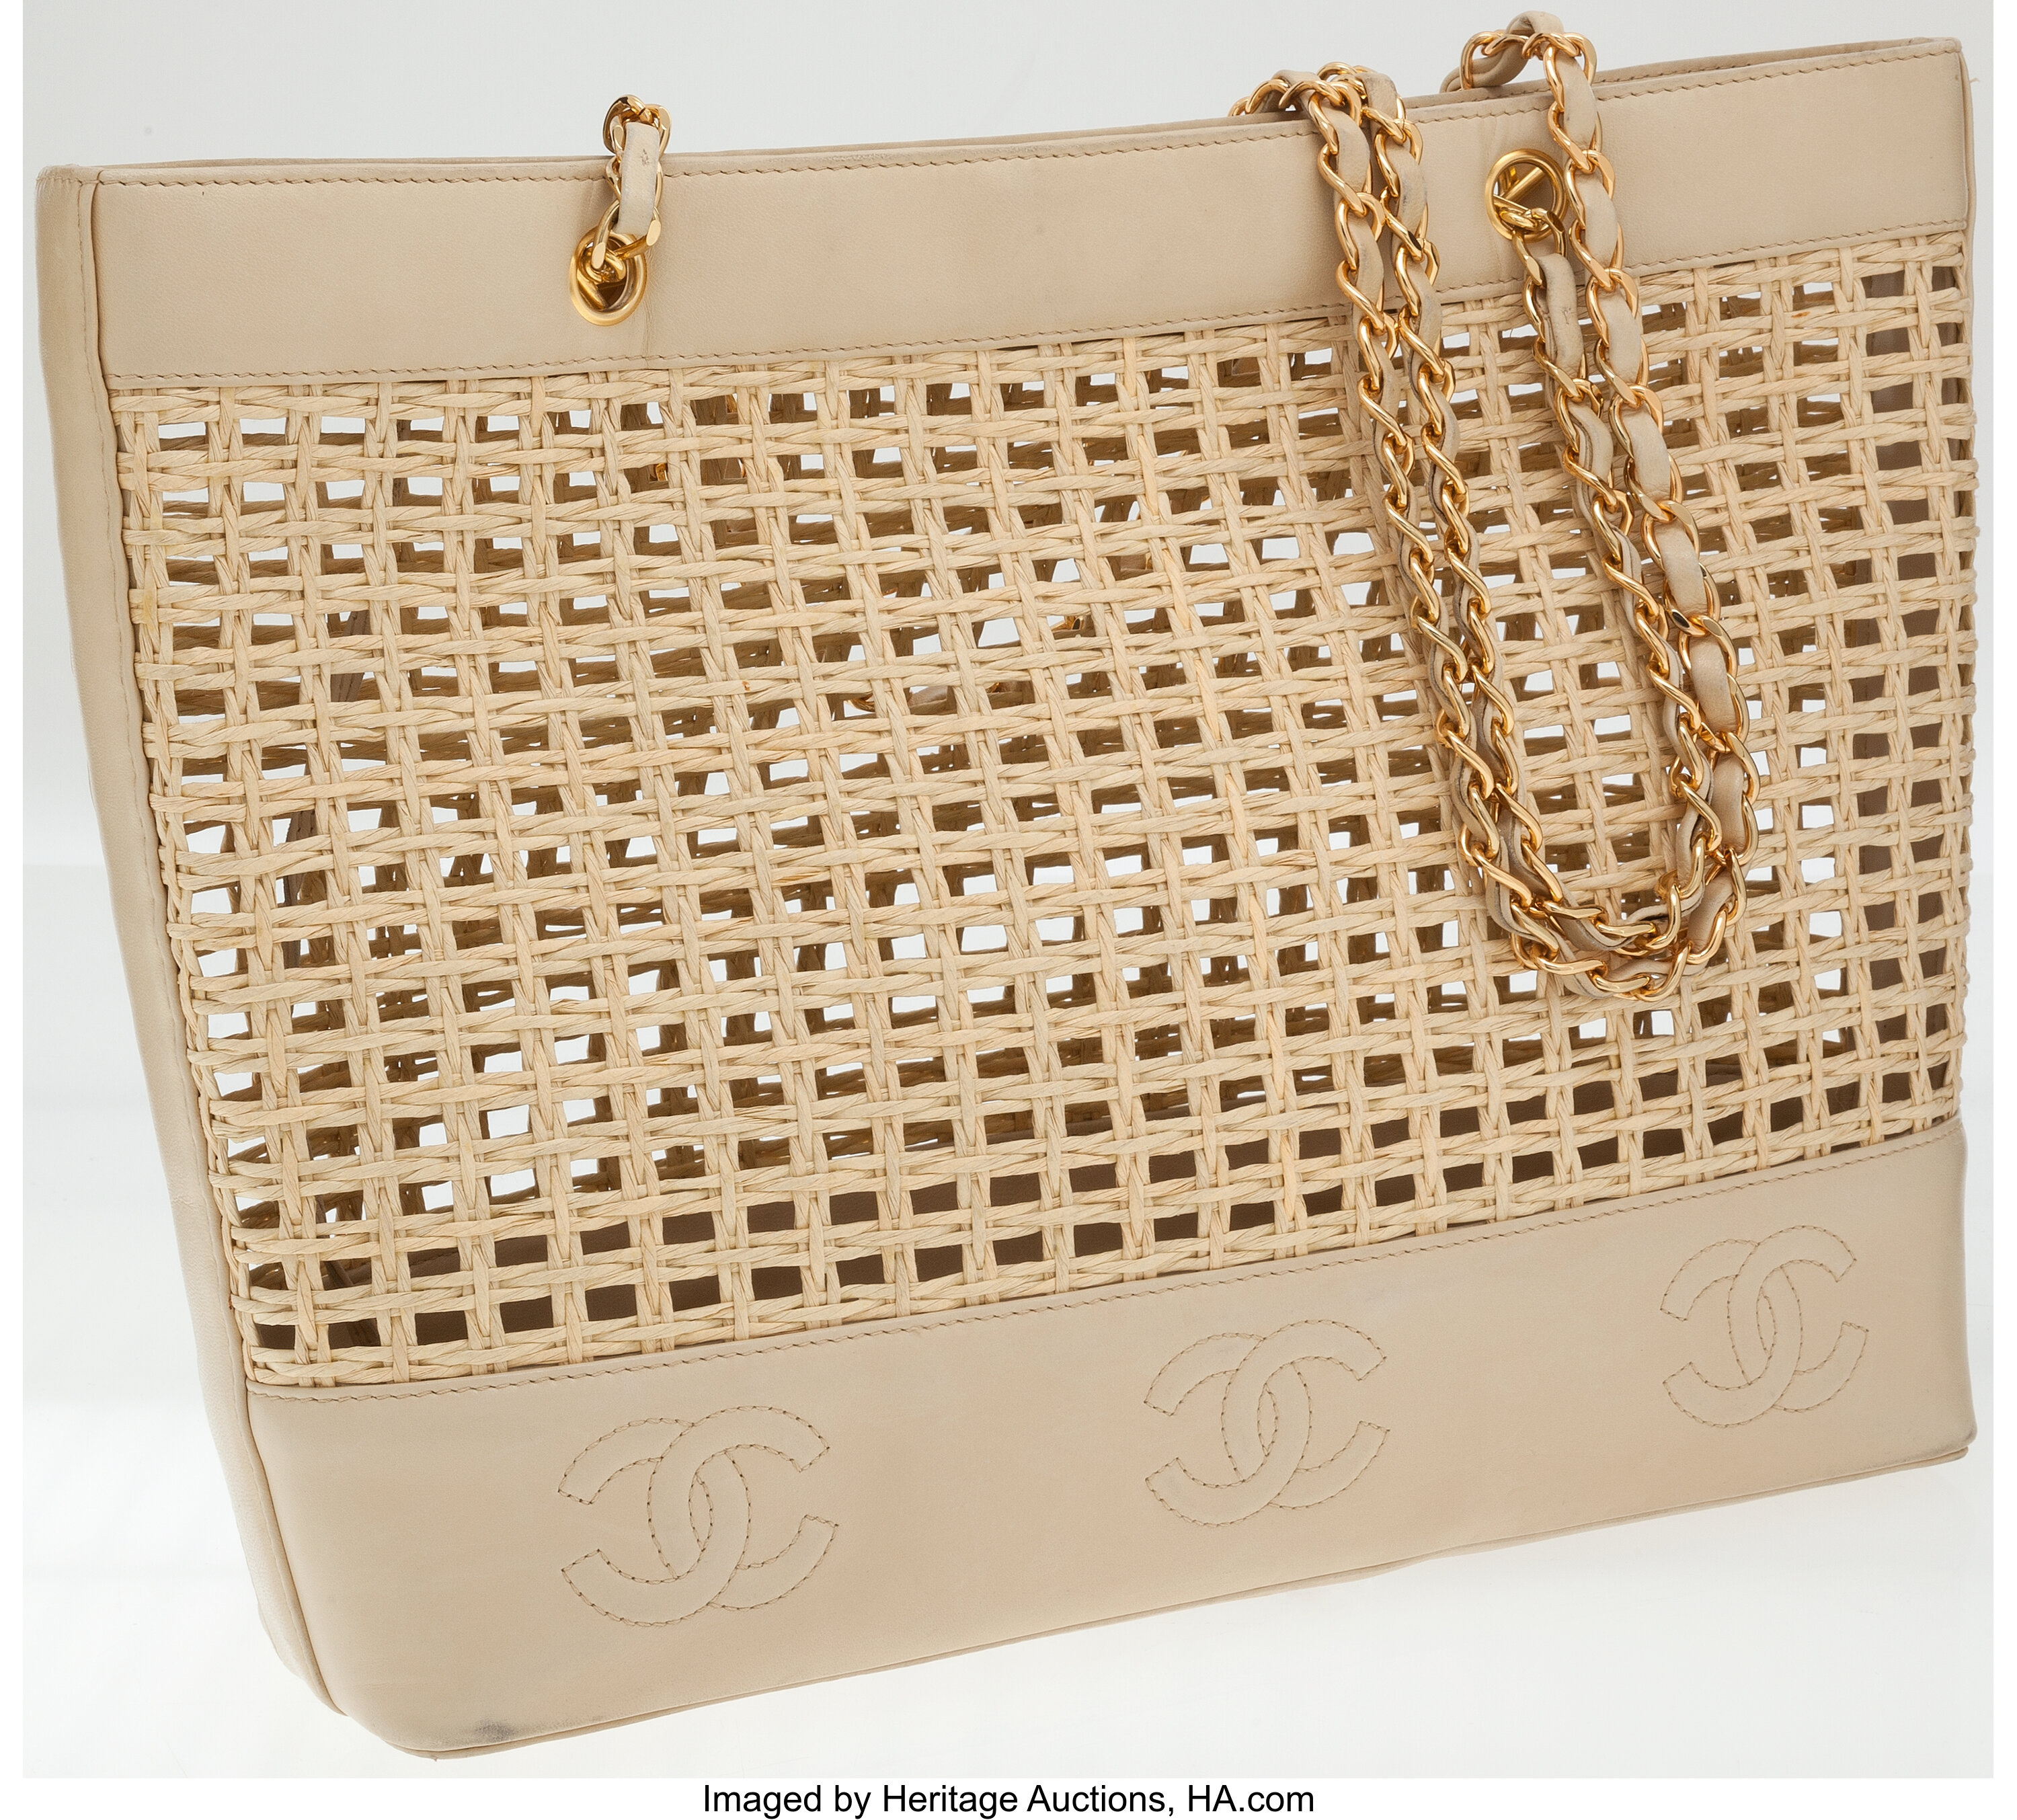 chanel gold medallion tote